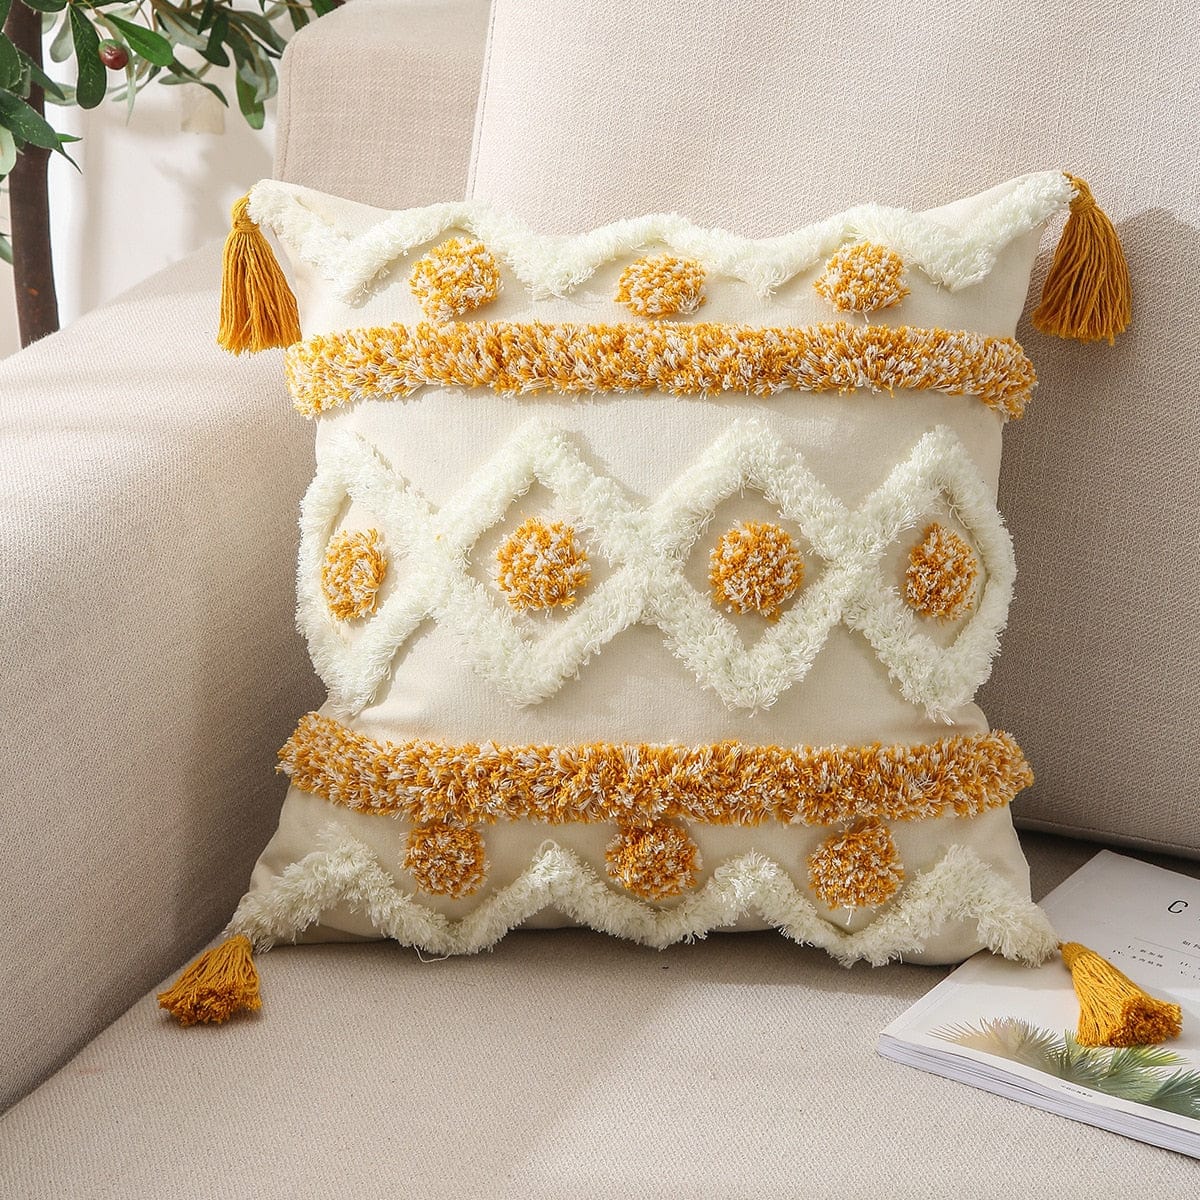 wickedafstore D Geometric Tufted Cushion Covers